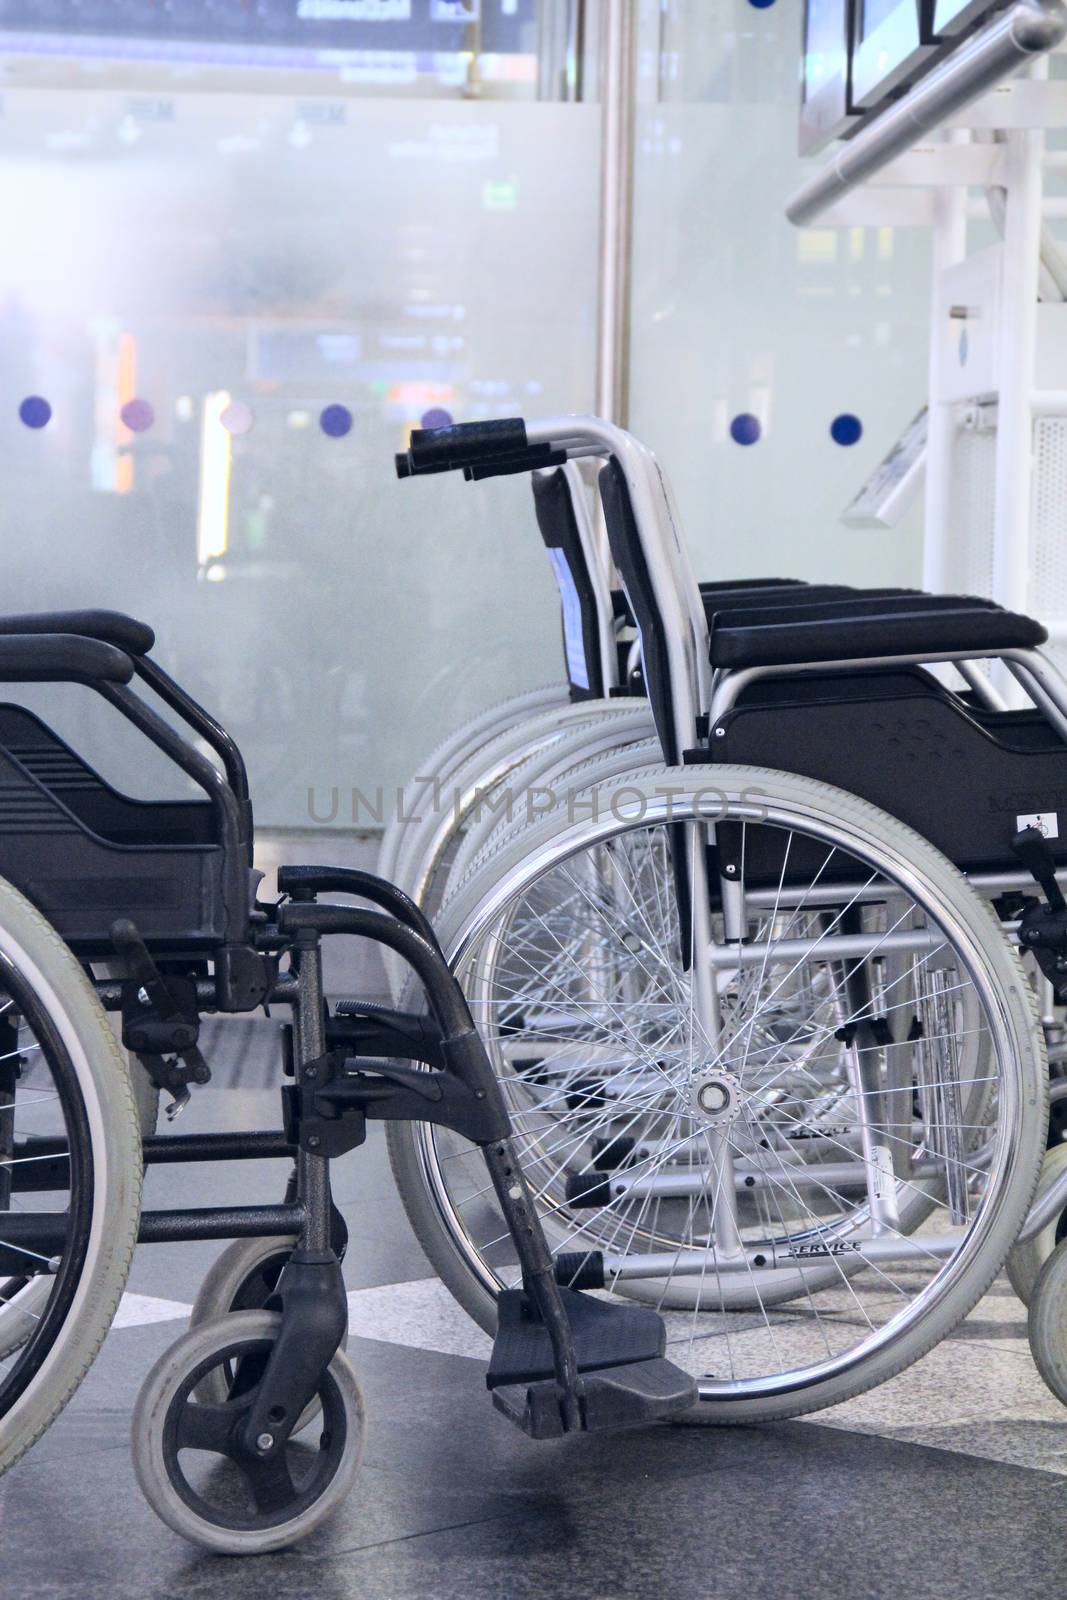 Photo of public wheelchairs in airport close-up